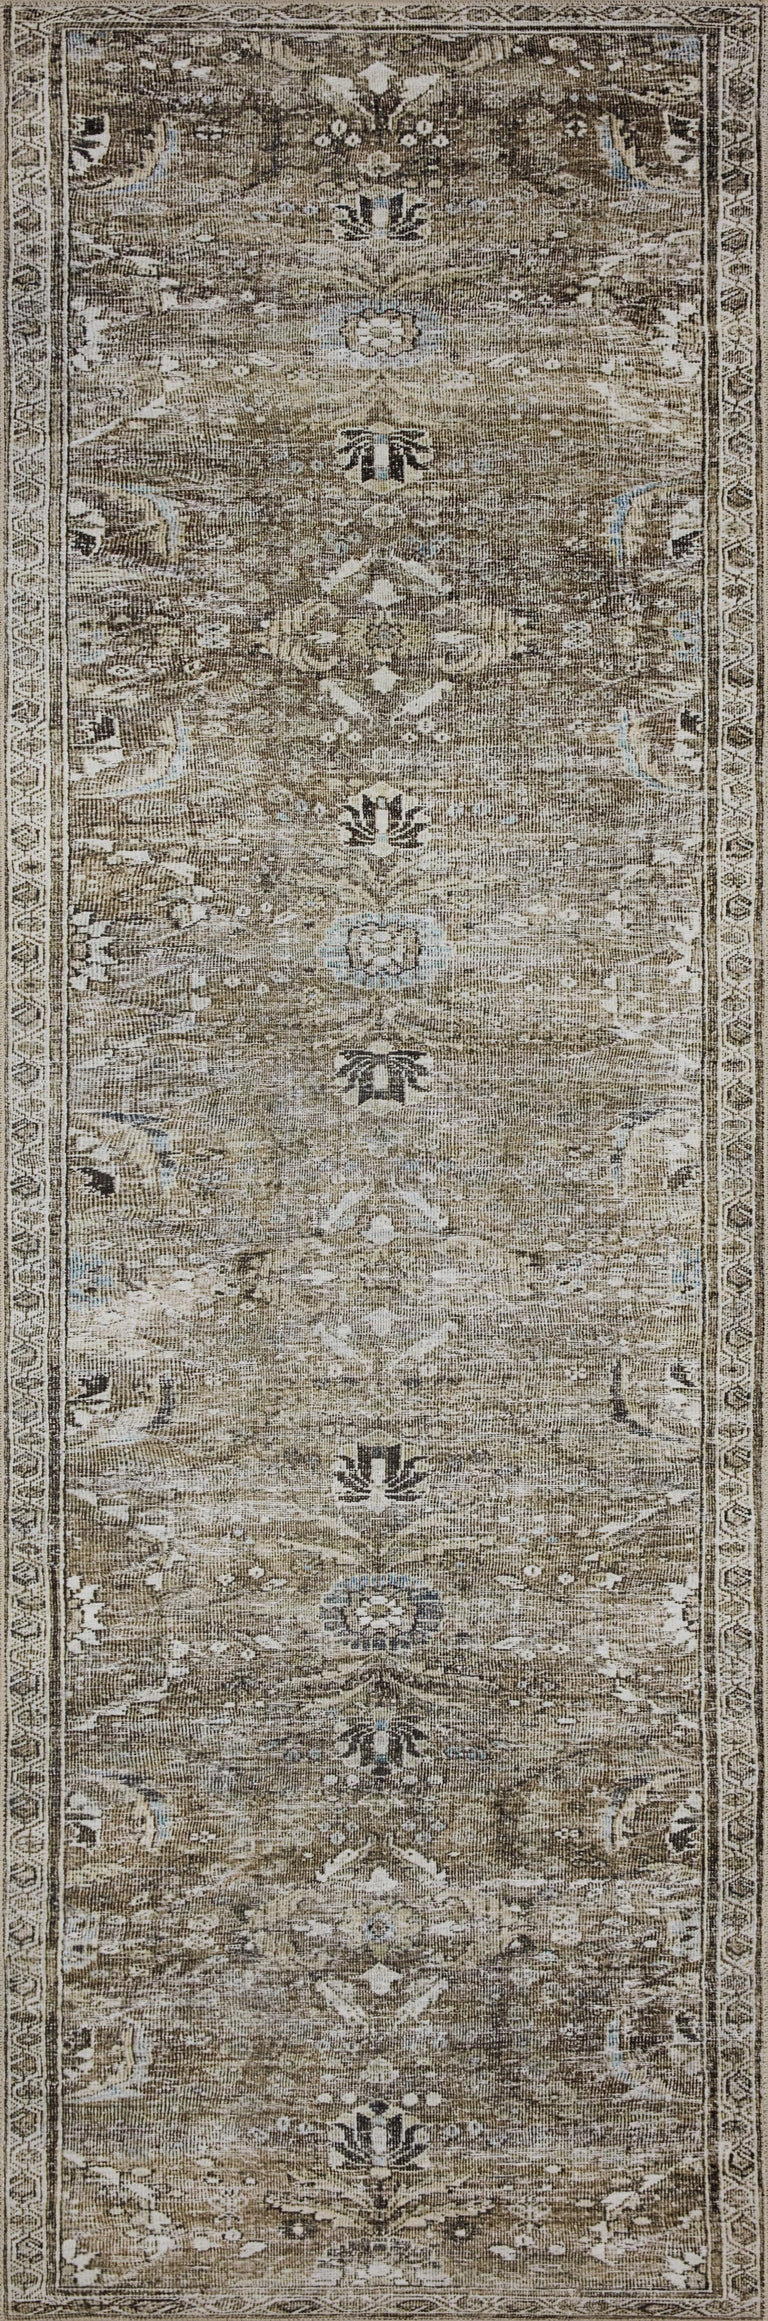 Loloi II Layla Collection Rug in Antique, Moss - 7'6" x 9'6"